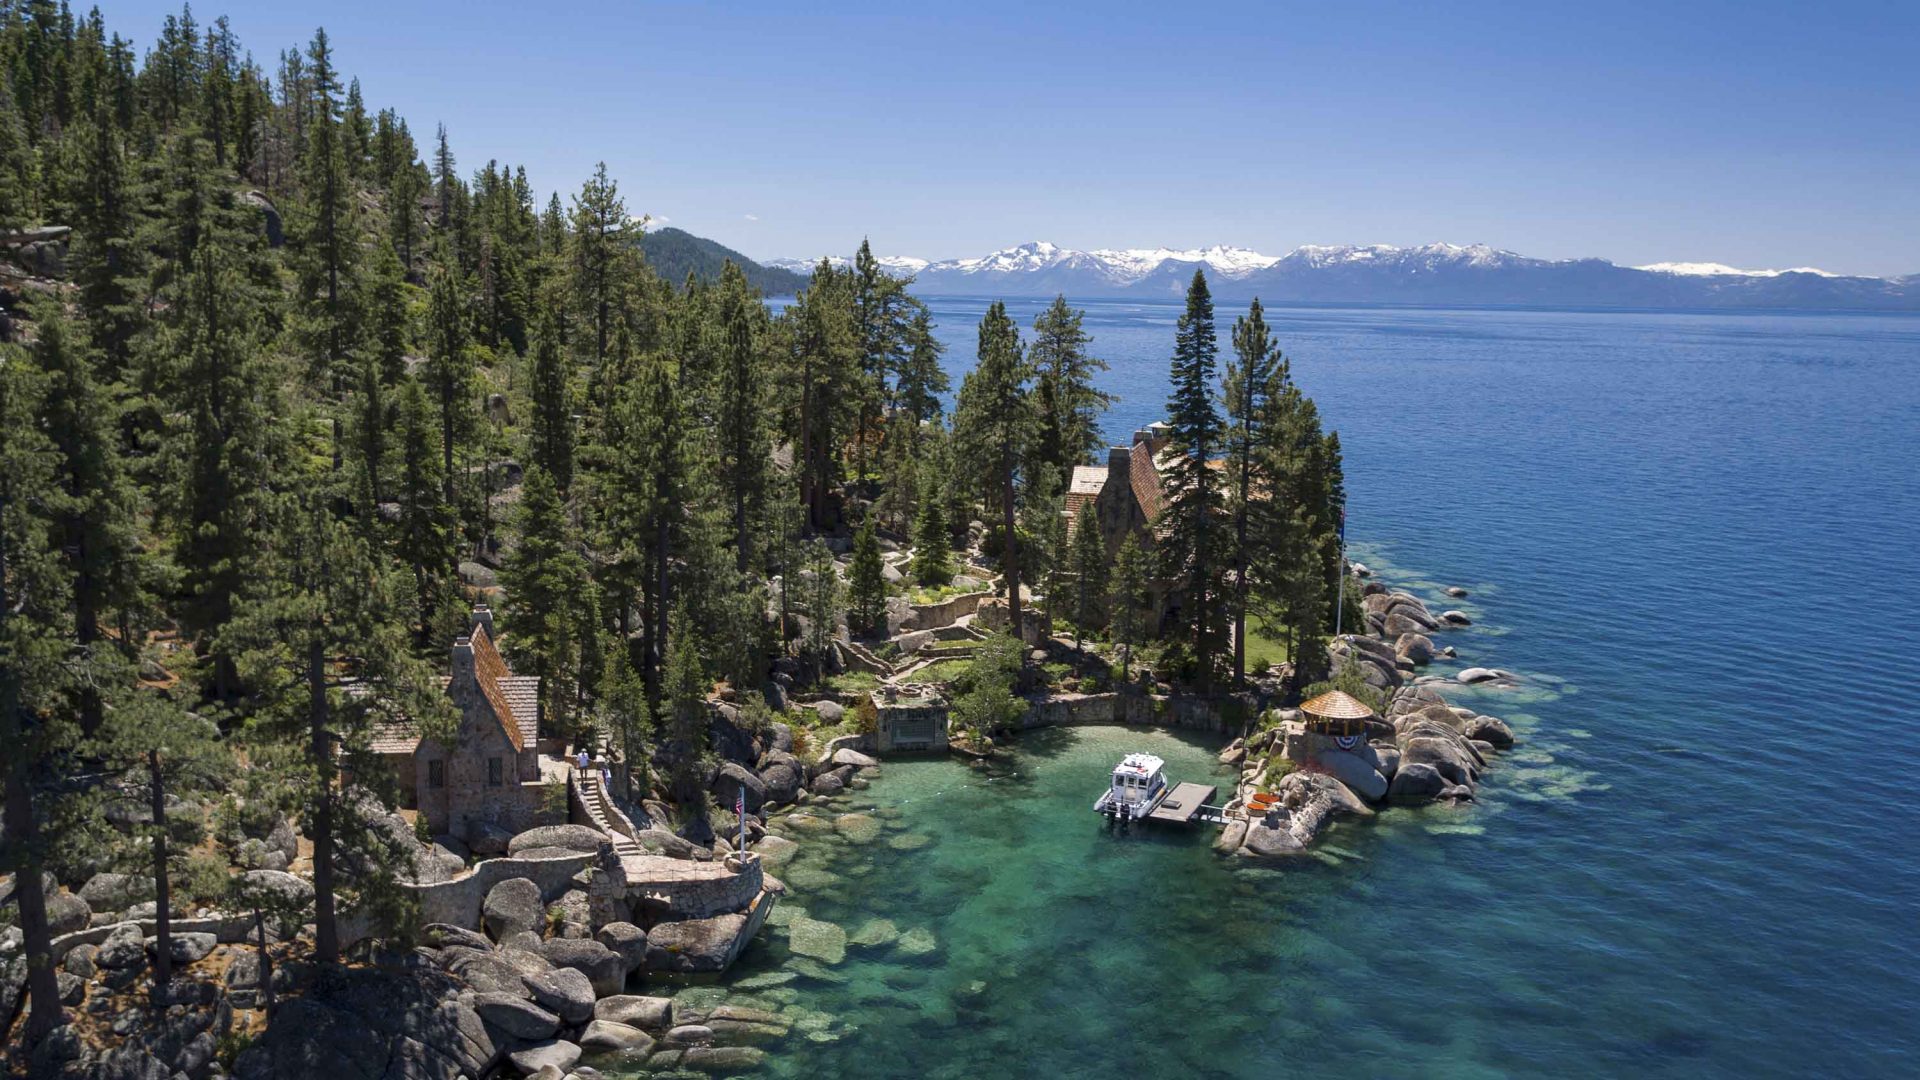 Looking town over the blue water of Lake Tahoe, framed by pine trees.